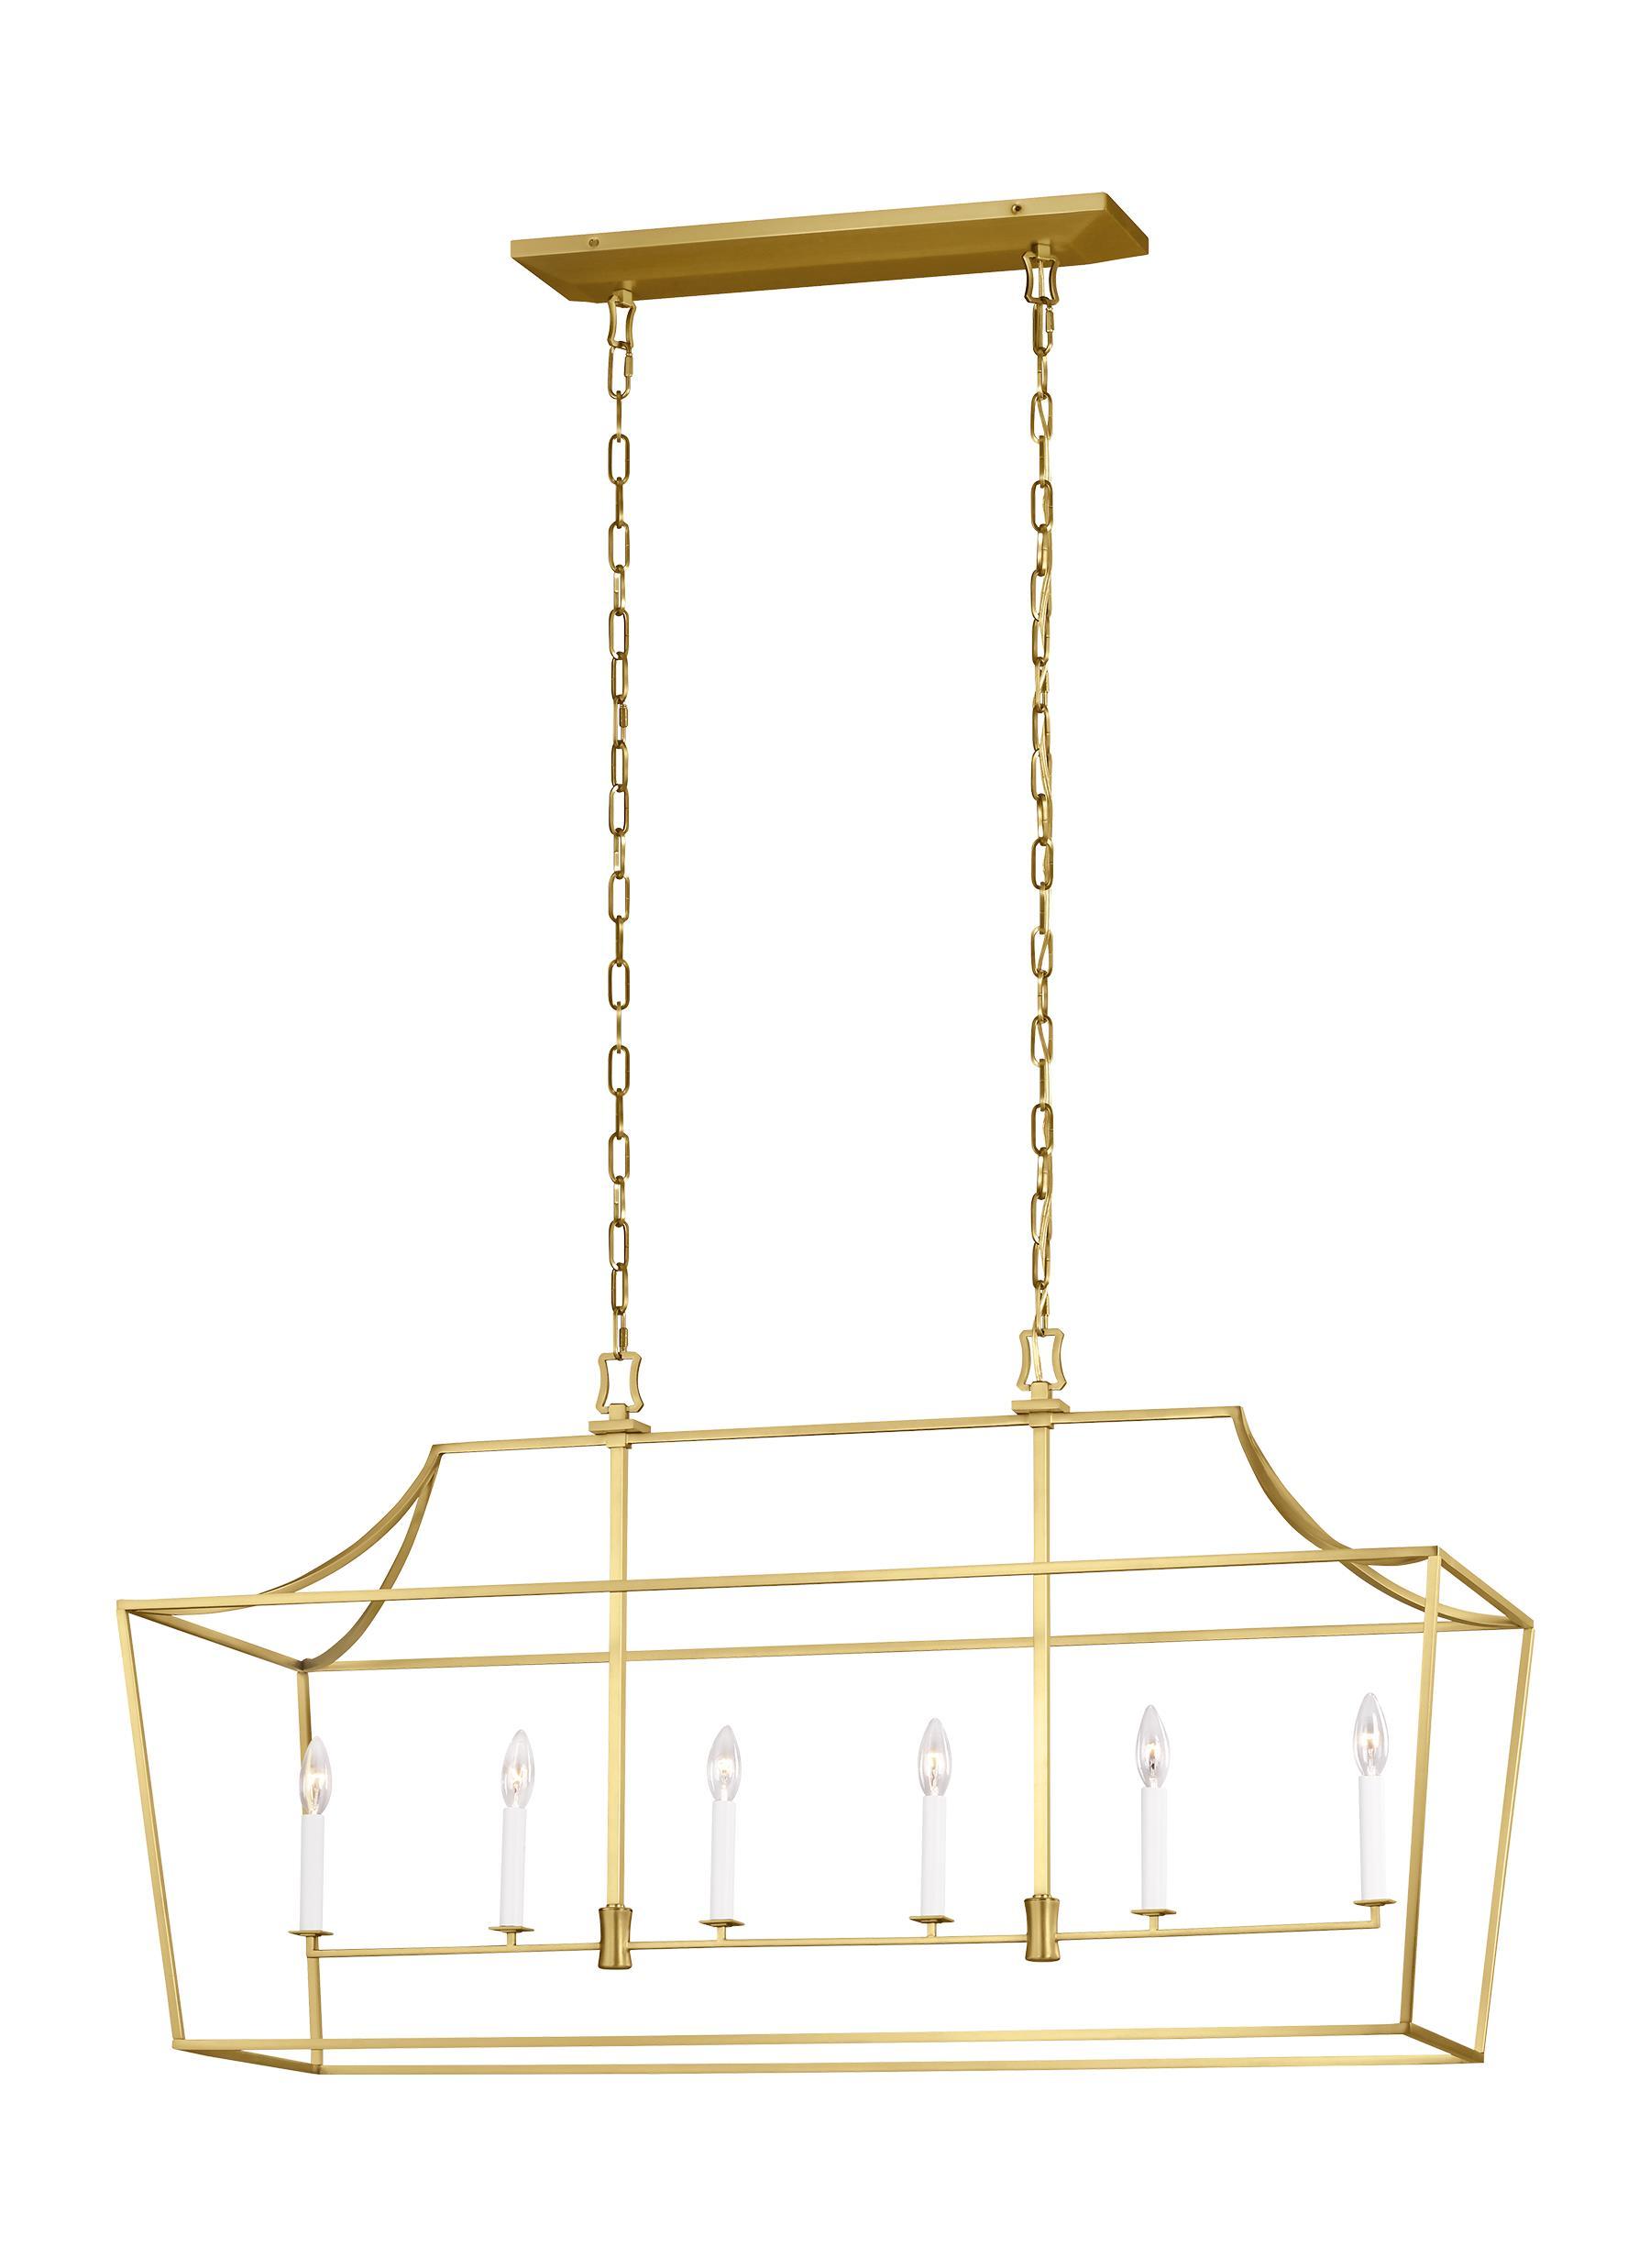 Southold Burnished Brass 6-Light Linear Lantern Ceiling Feiss 